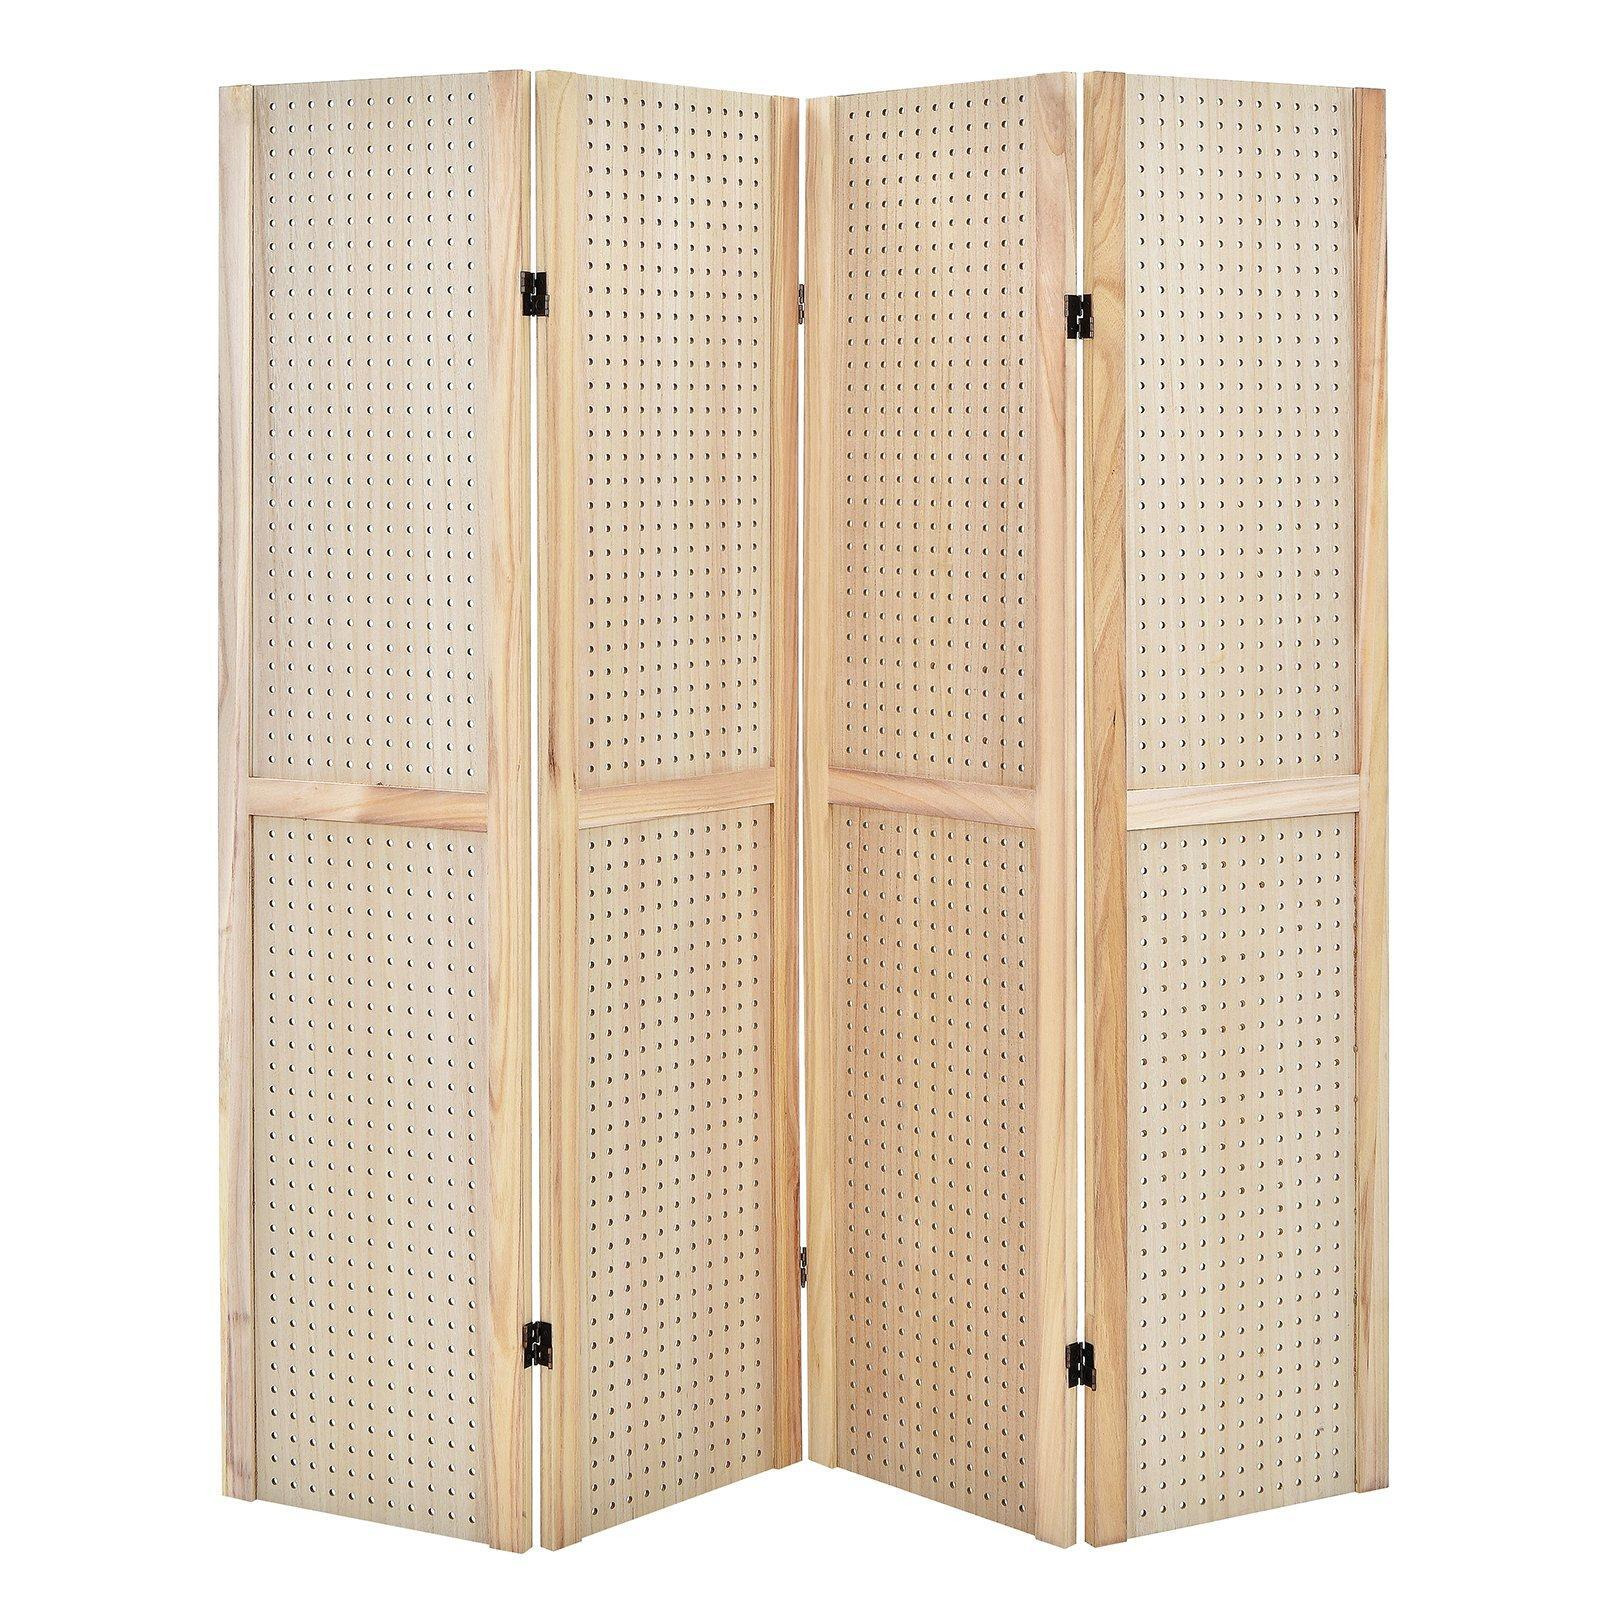 4 Panel Room Divider Wooden Screen Wall Folding Room Partition Separator Privacy - image 1